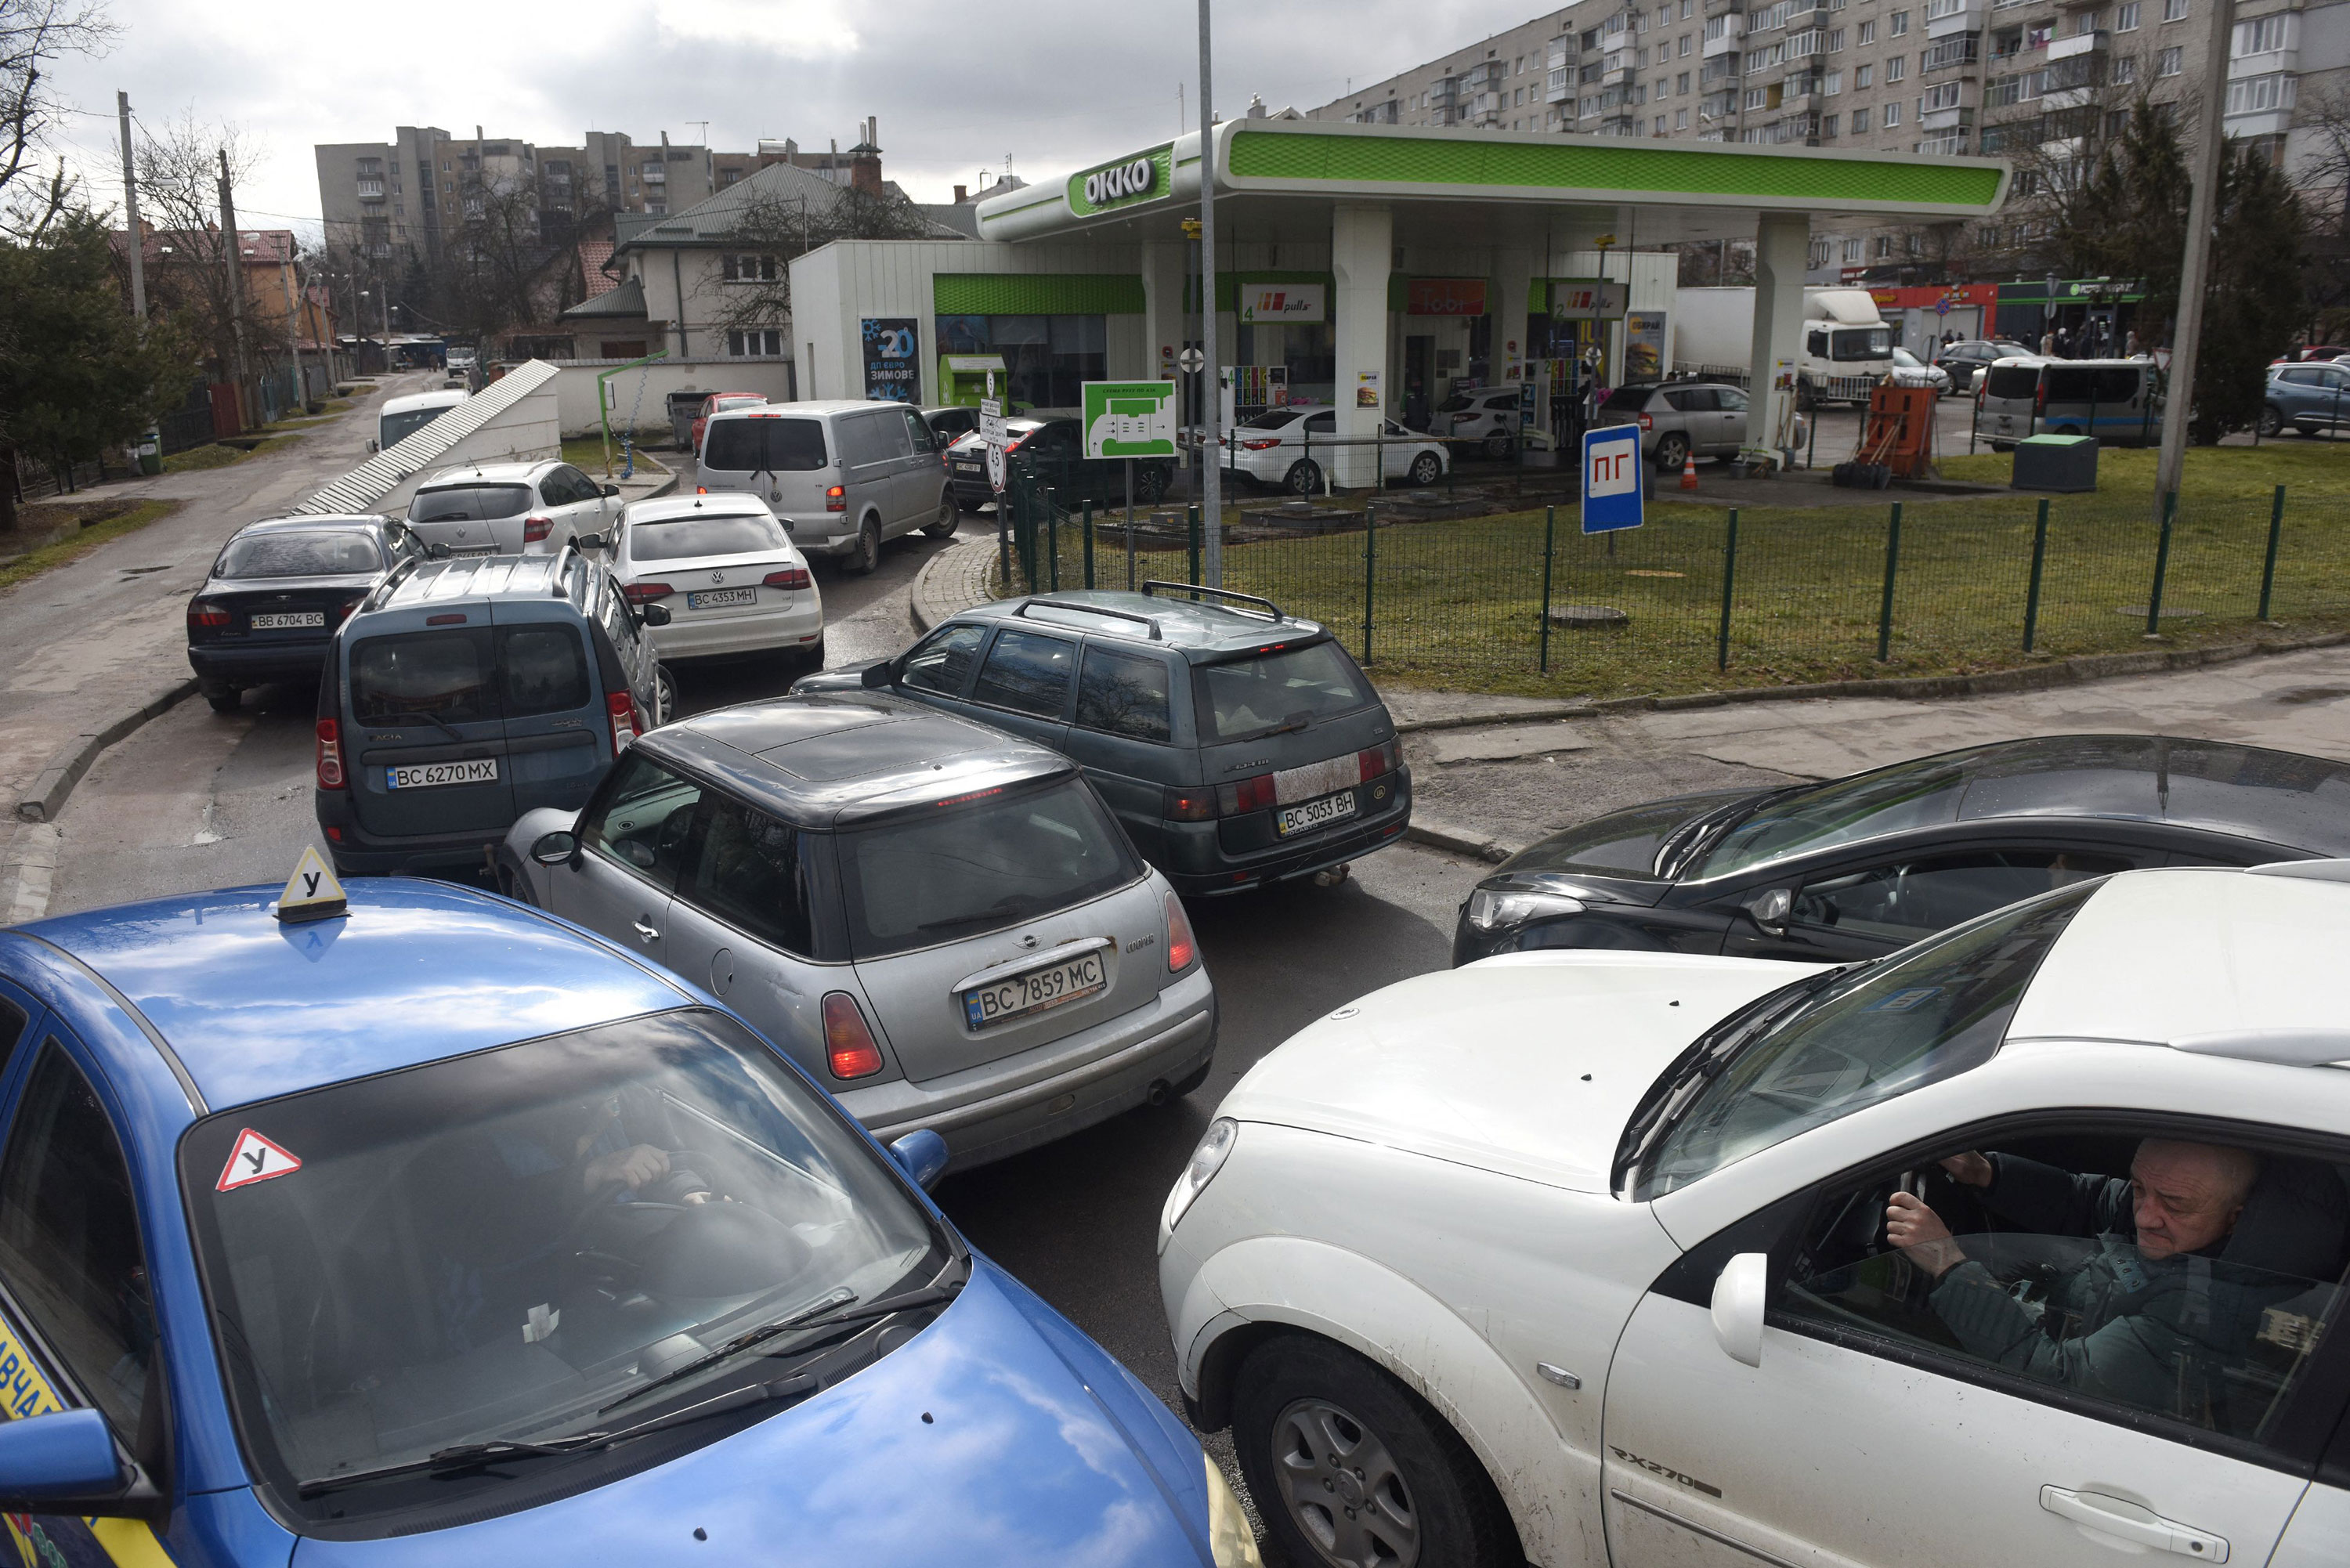 People wait in line at a gas station in Lviv, Ukraine, on February 24.